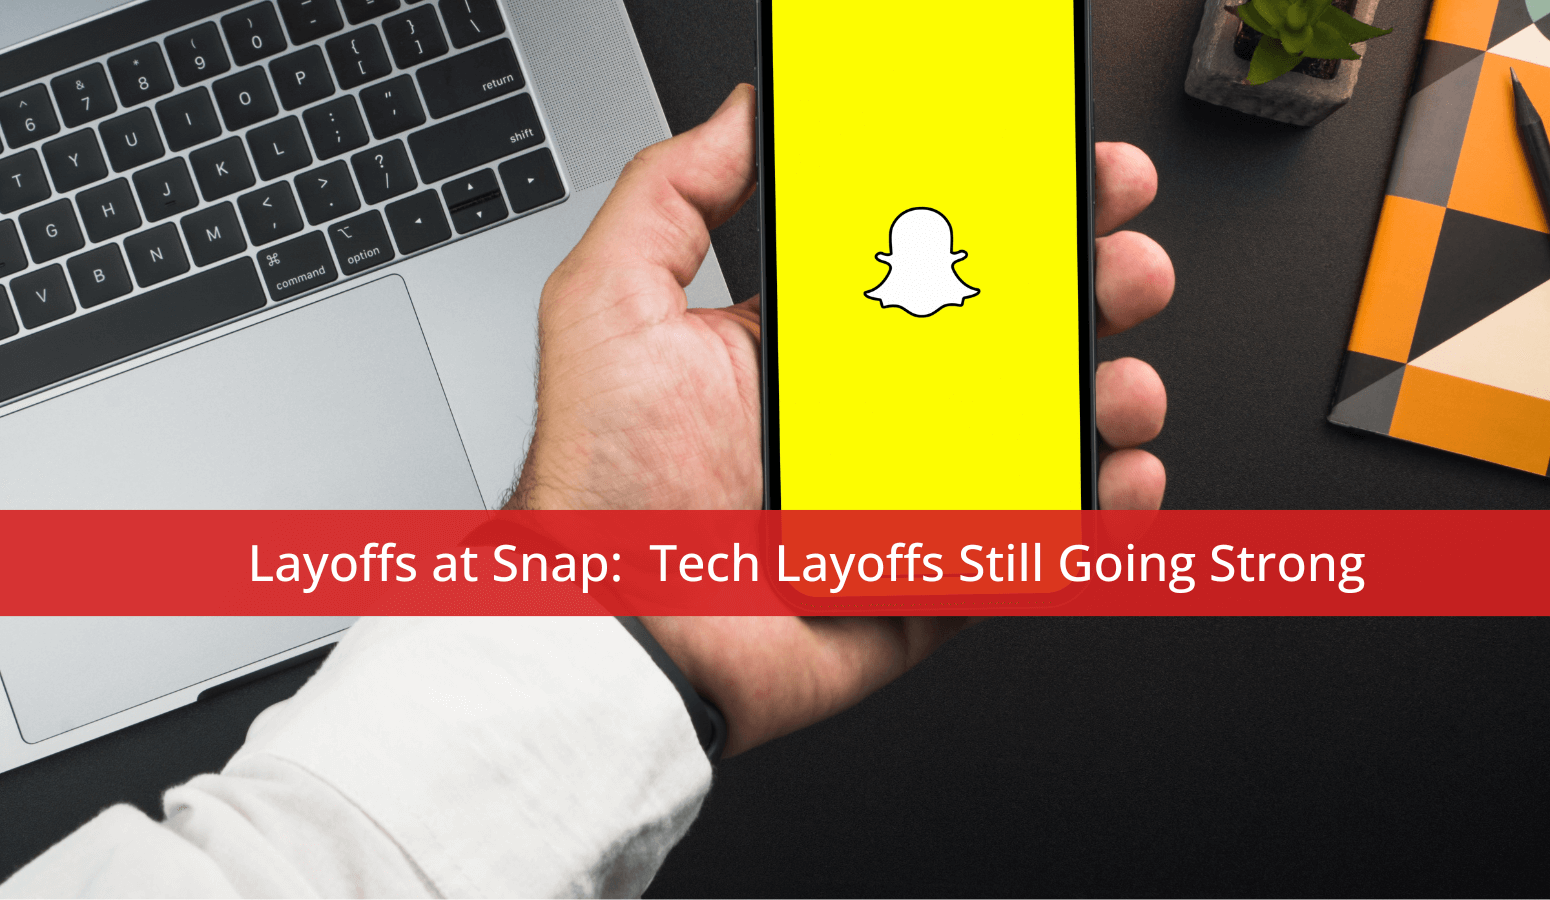 Featured image for “Layoffs at Snap:  Tech Layoffs Still Going Strong”